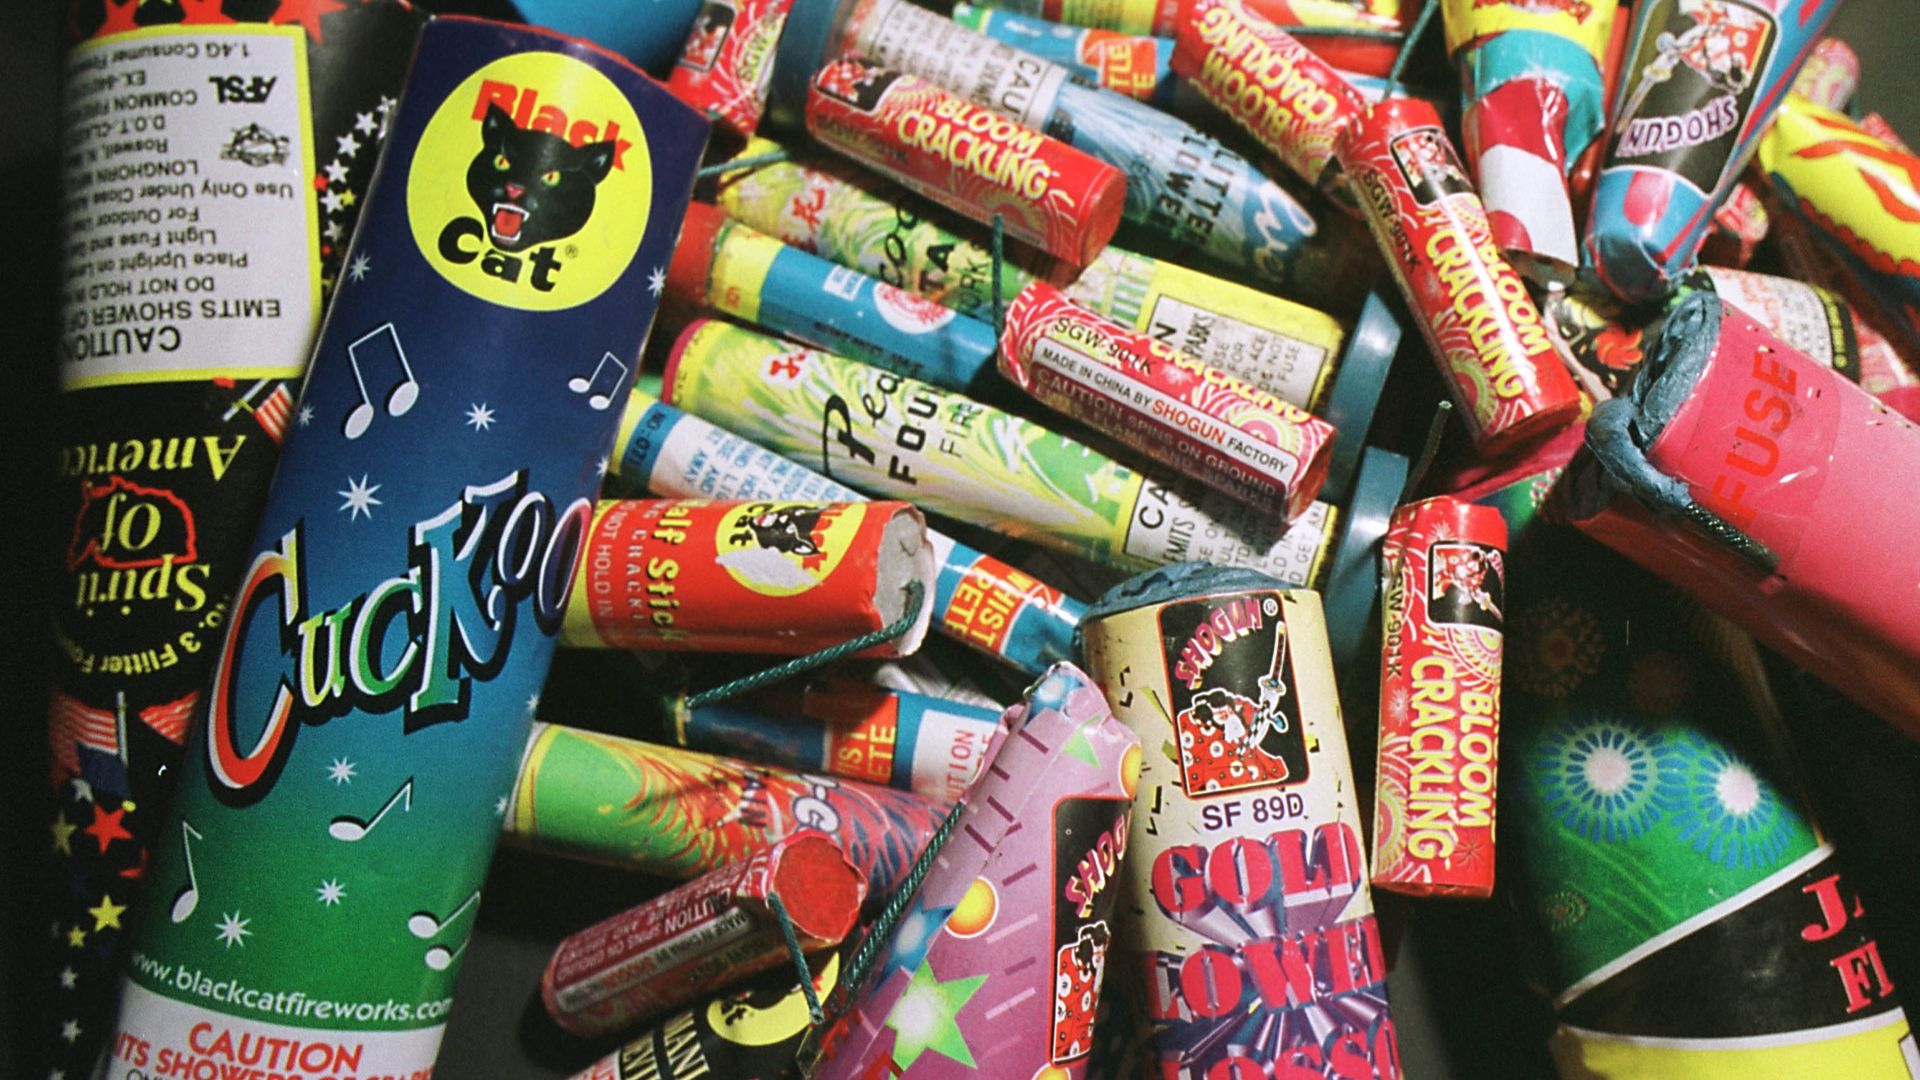 Unlit fireworks in a pile 